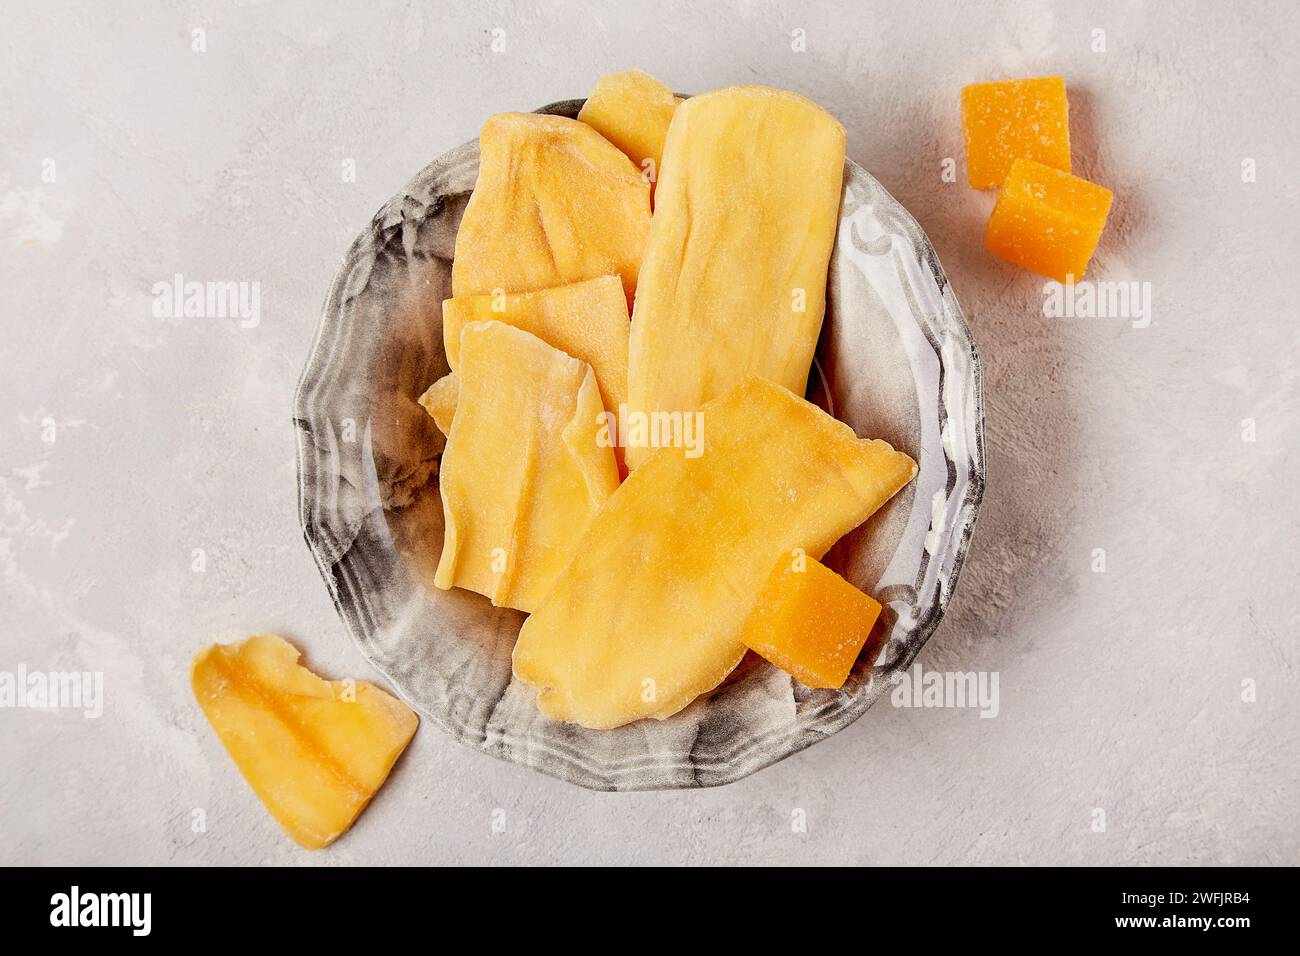 Tropical delight snack - captivating imagery of healthy dried mango treats. Stock Photo